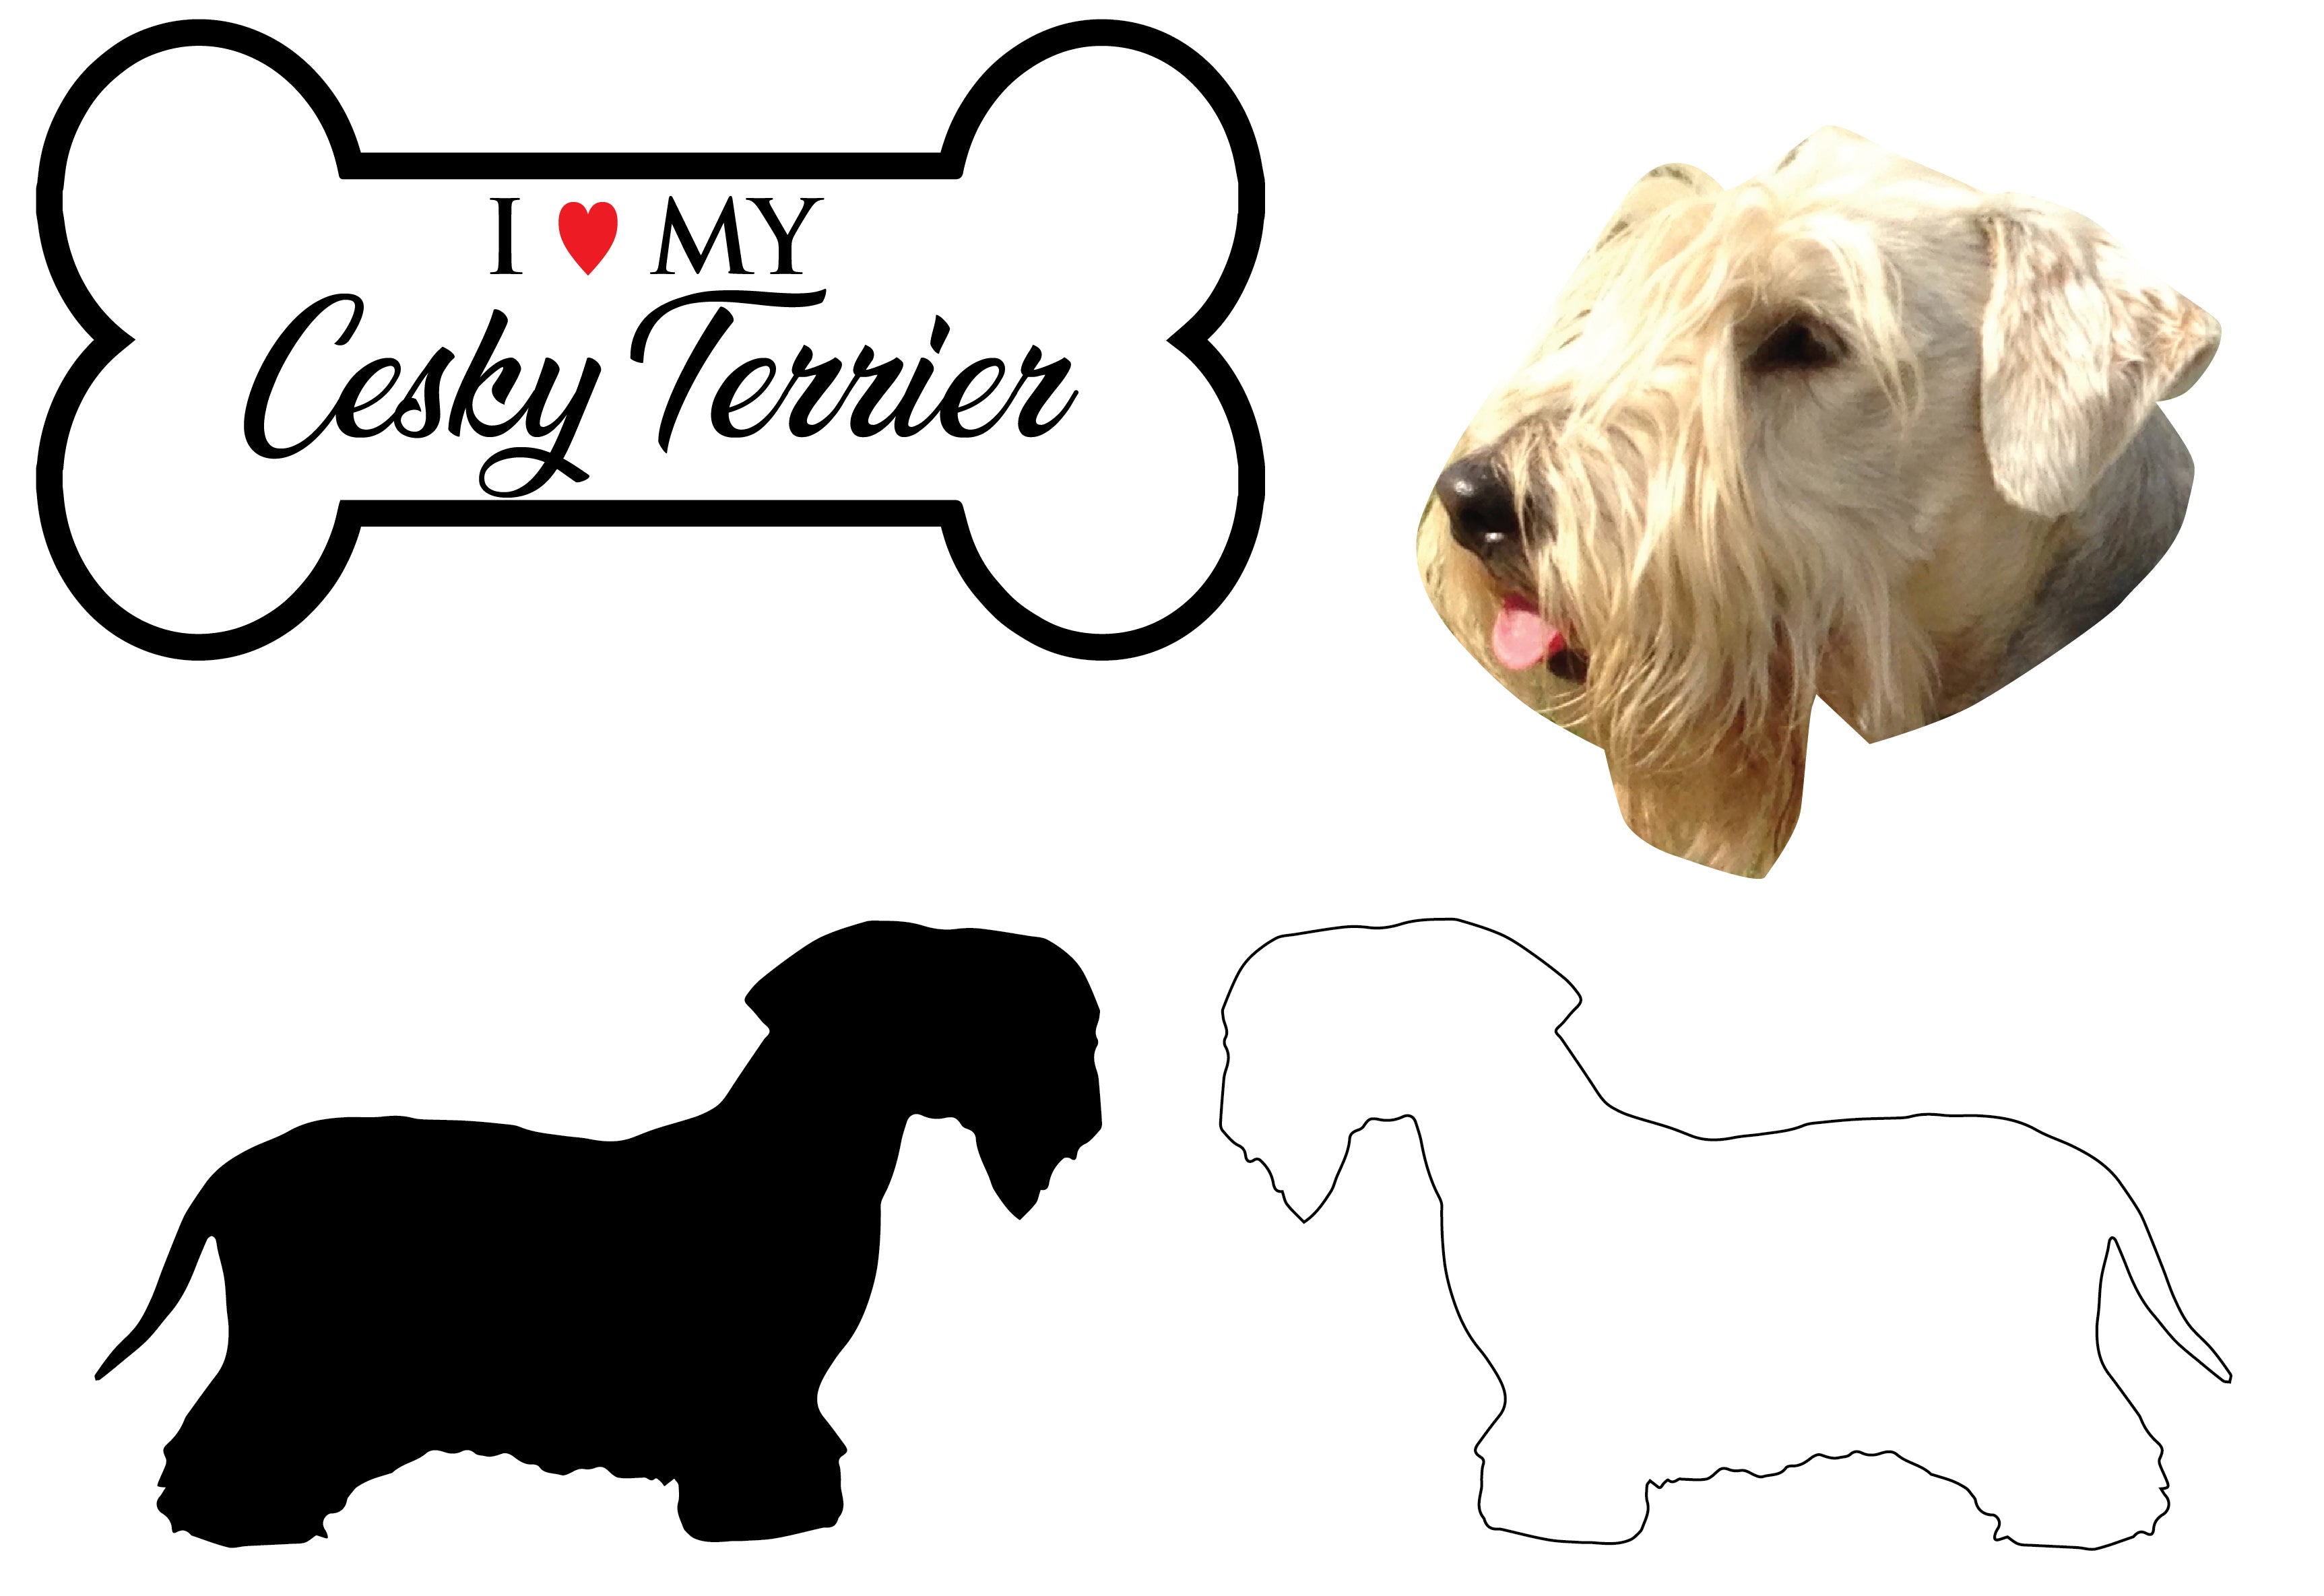 Cesky Terrier - Dog Breed Decals (Set of 16) - Sizes in Description